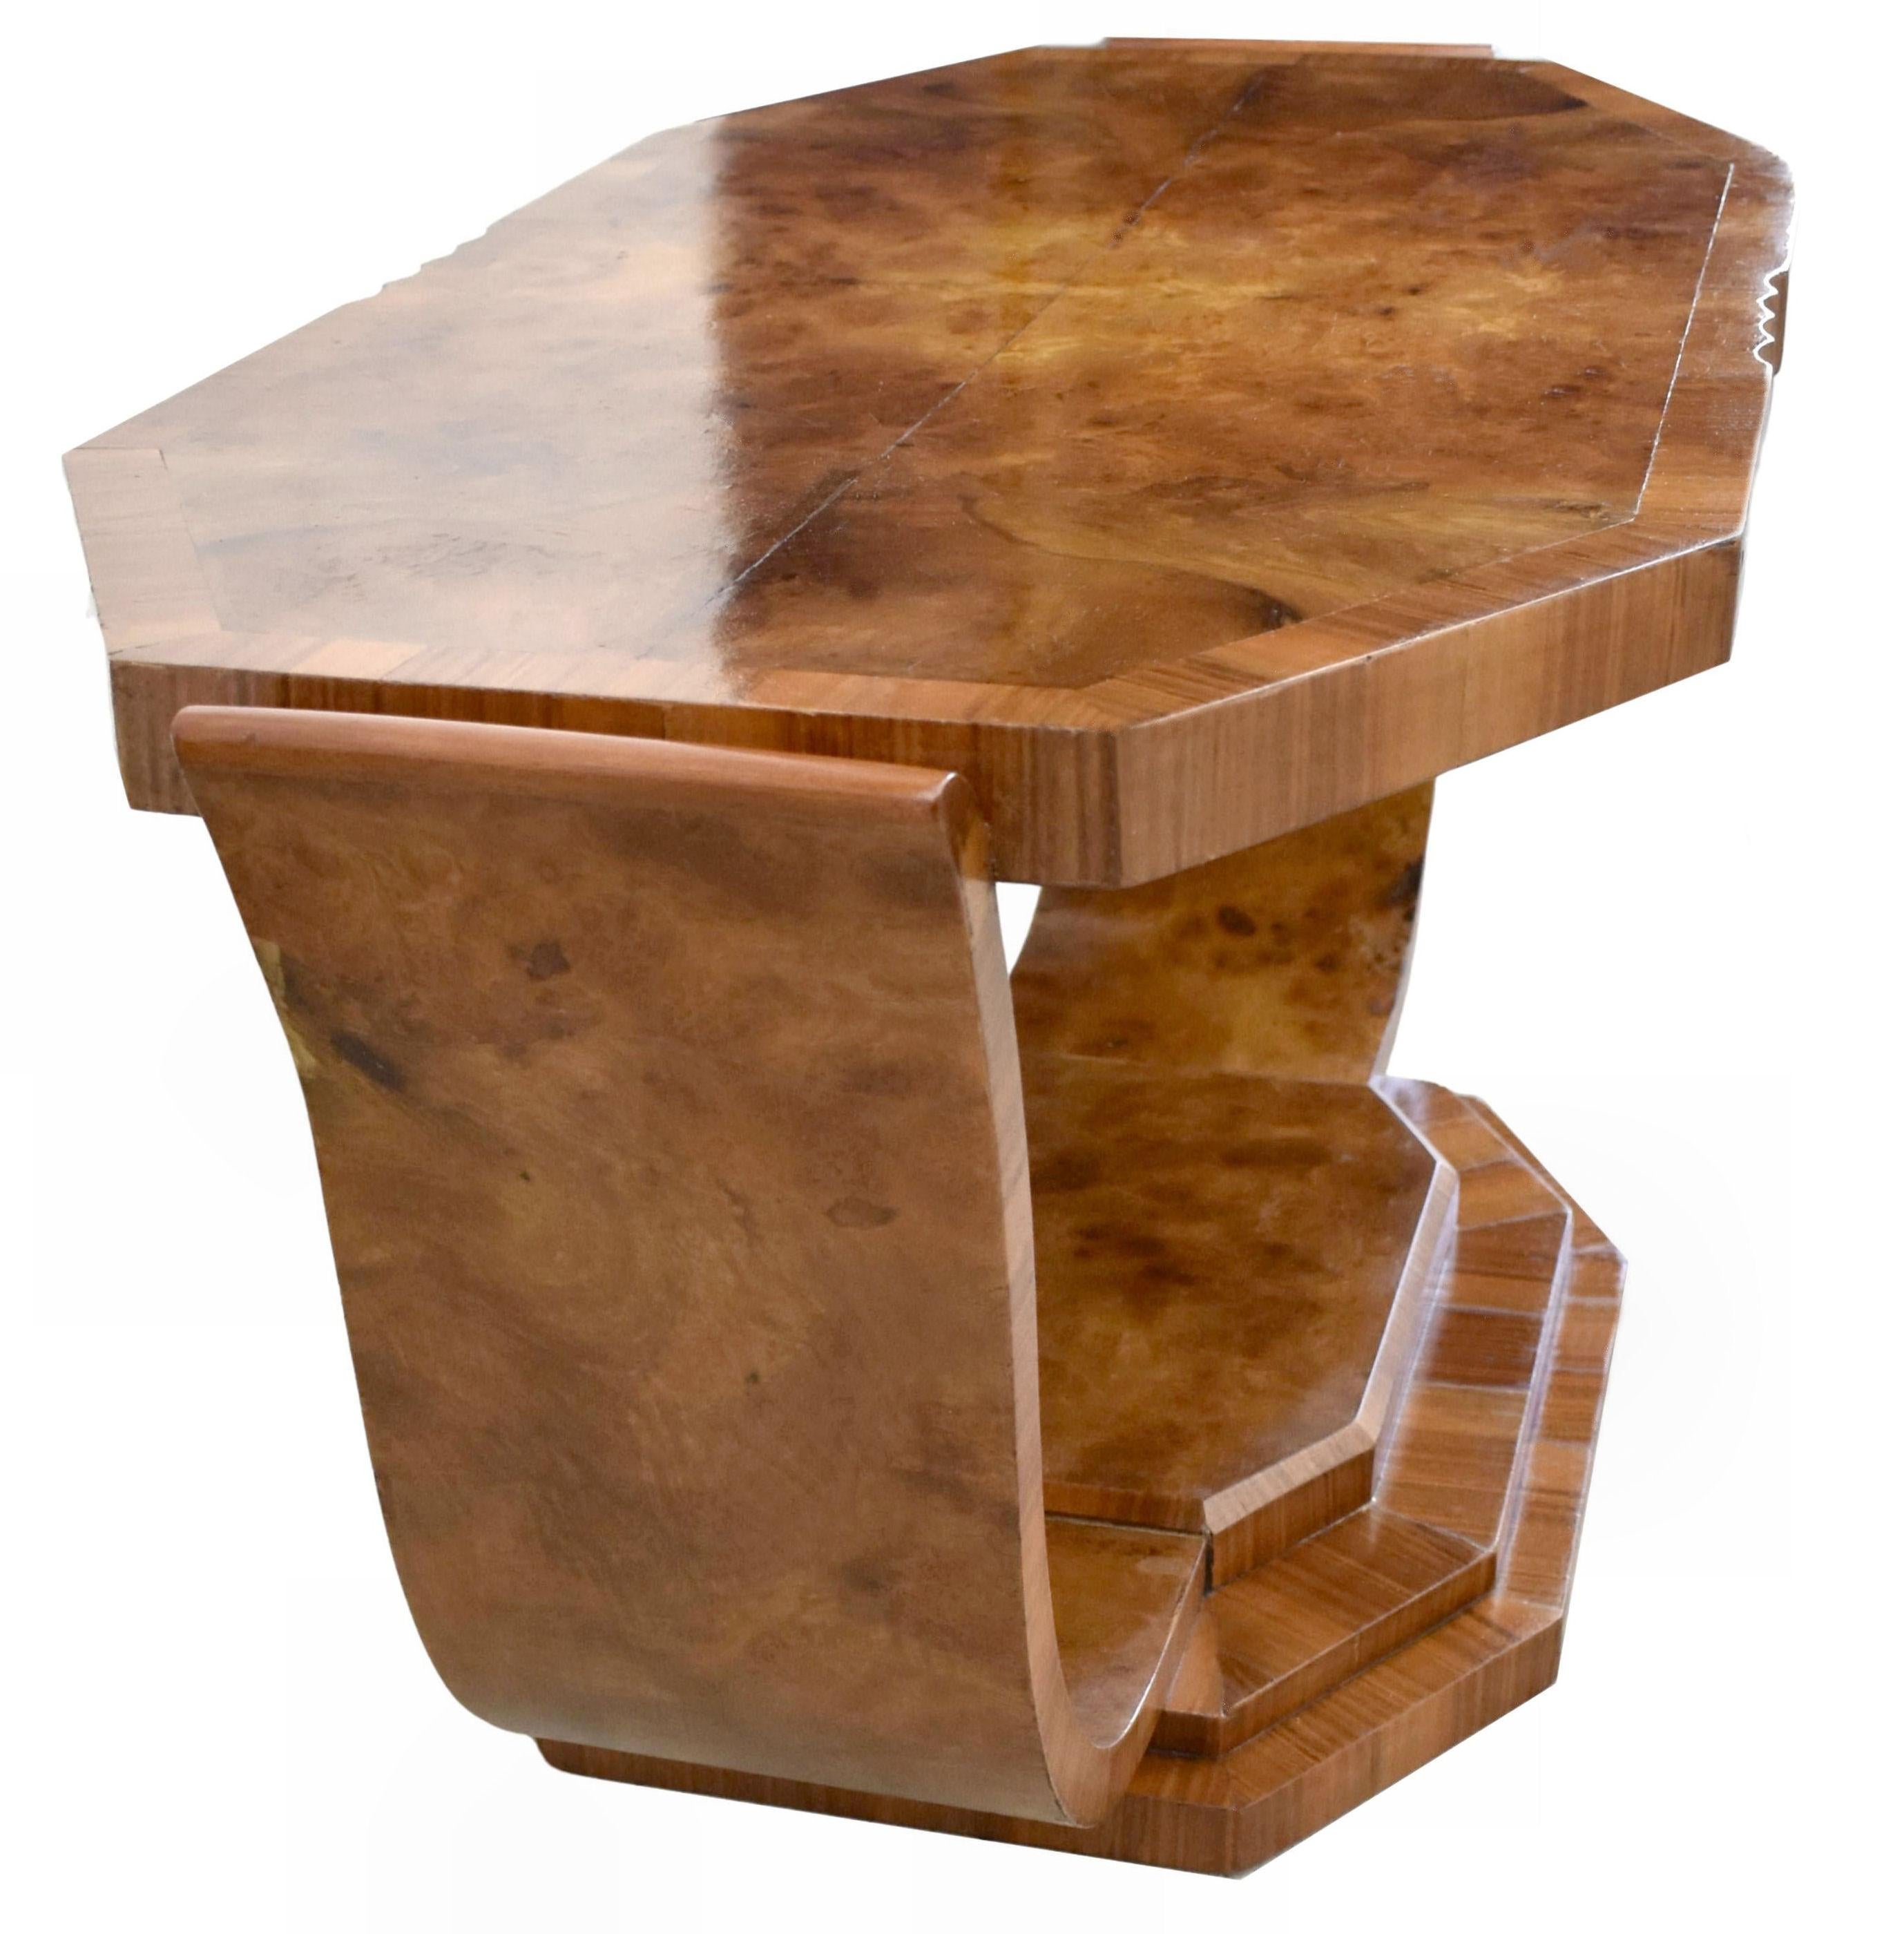 20th Century Art Deco Walnut Occasional U Base Table By Hille, English, c1930 For Sale